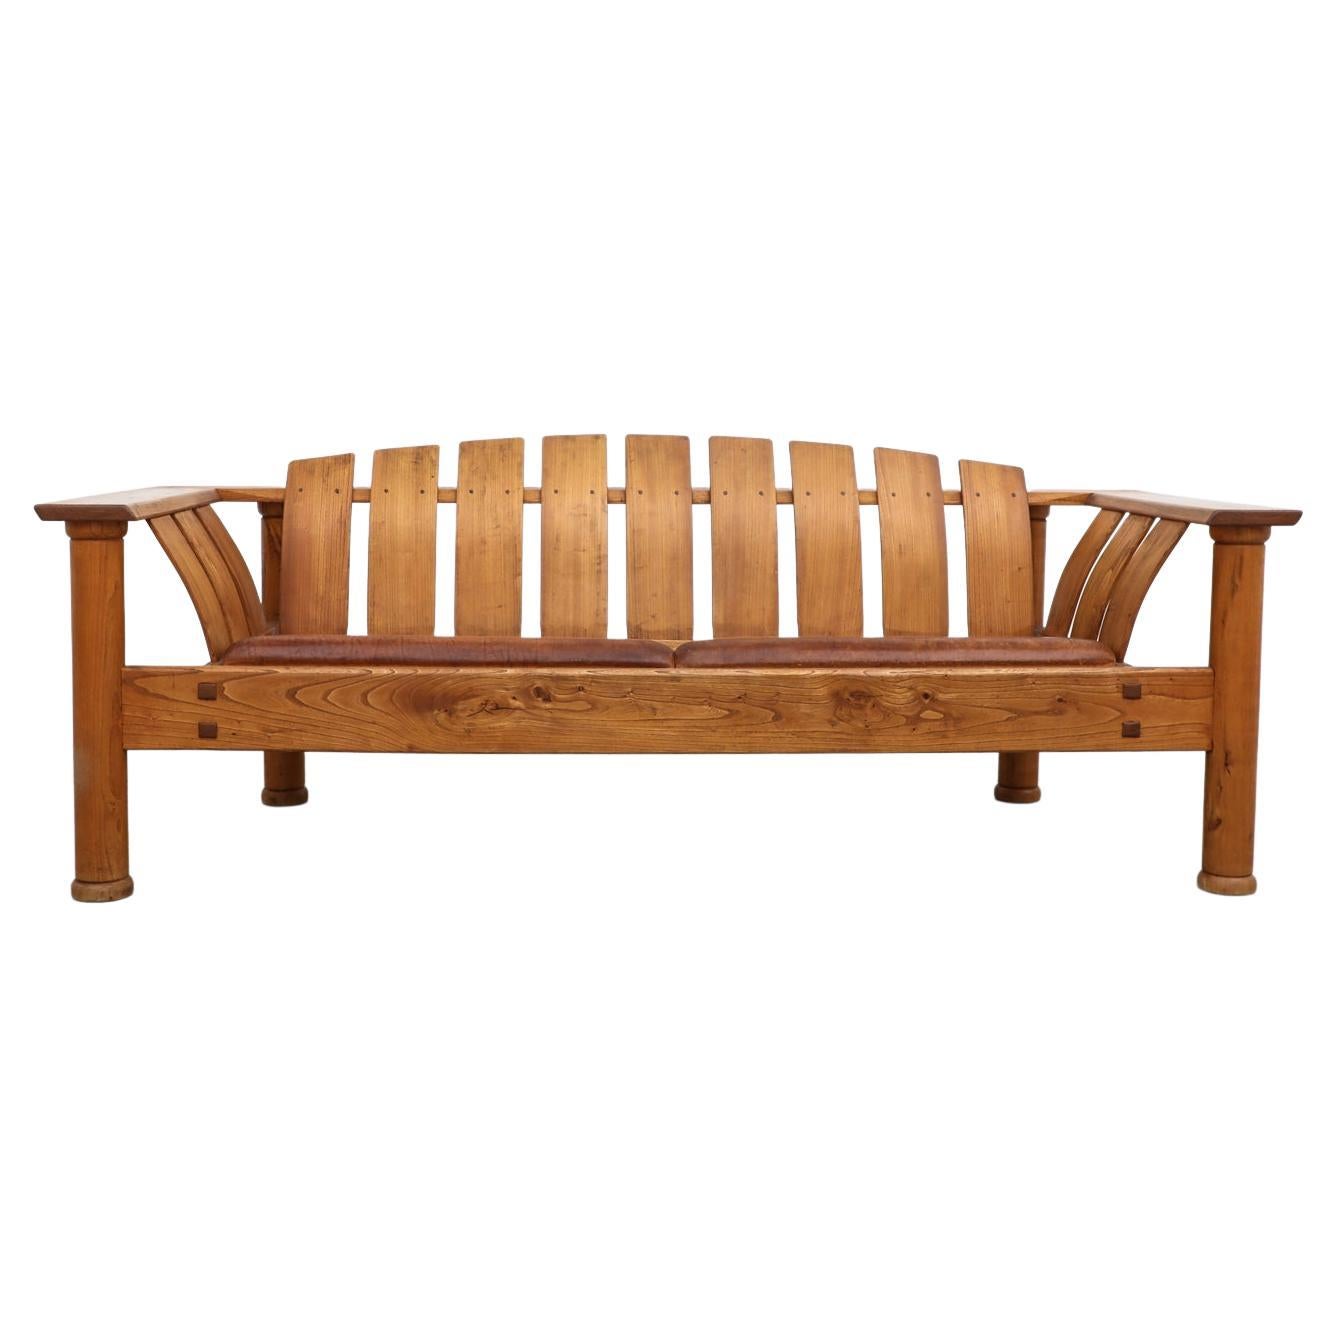 Stefan During "Colosseum" Sofa w/ Slatted Curved Back & Brown Leather Bench Seat For Sale